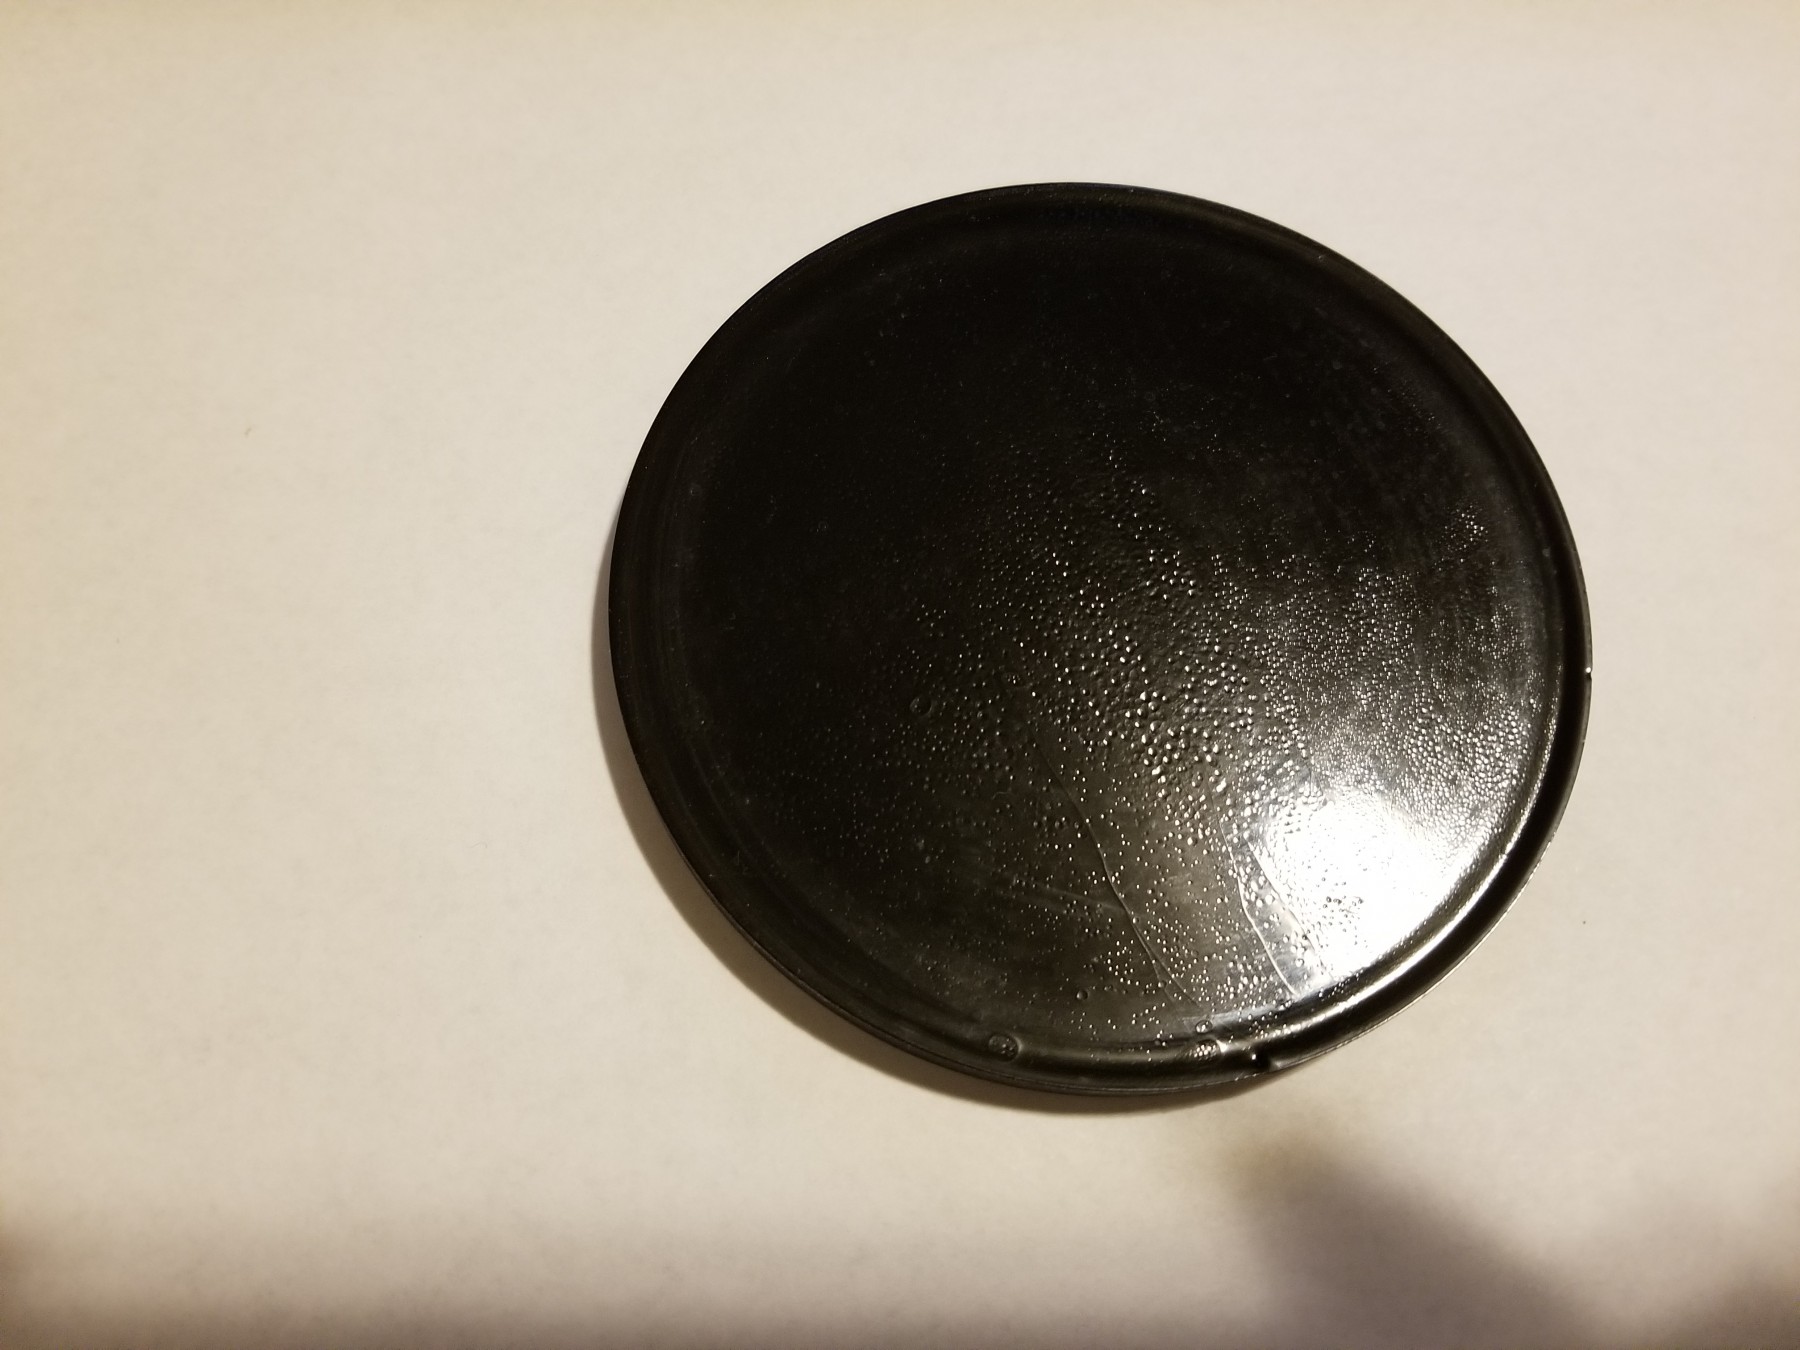 Silicone Drink Coasters